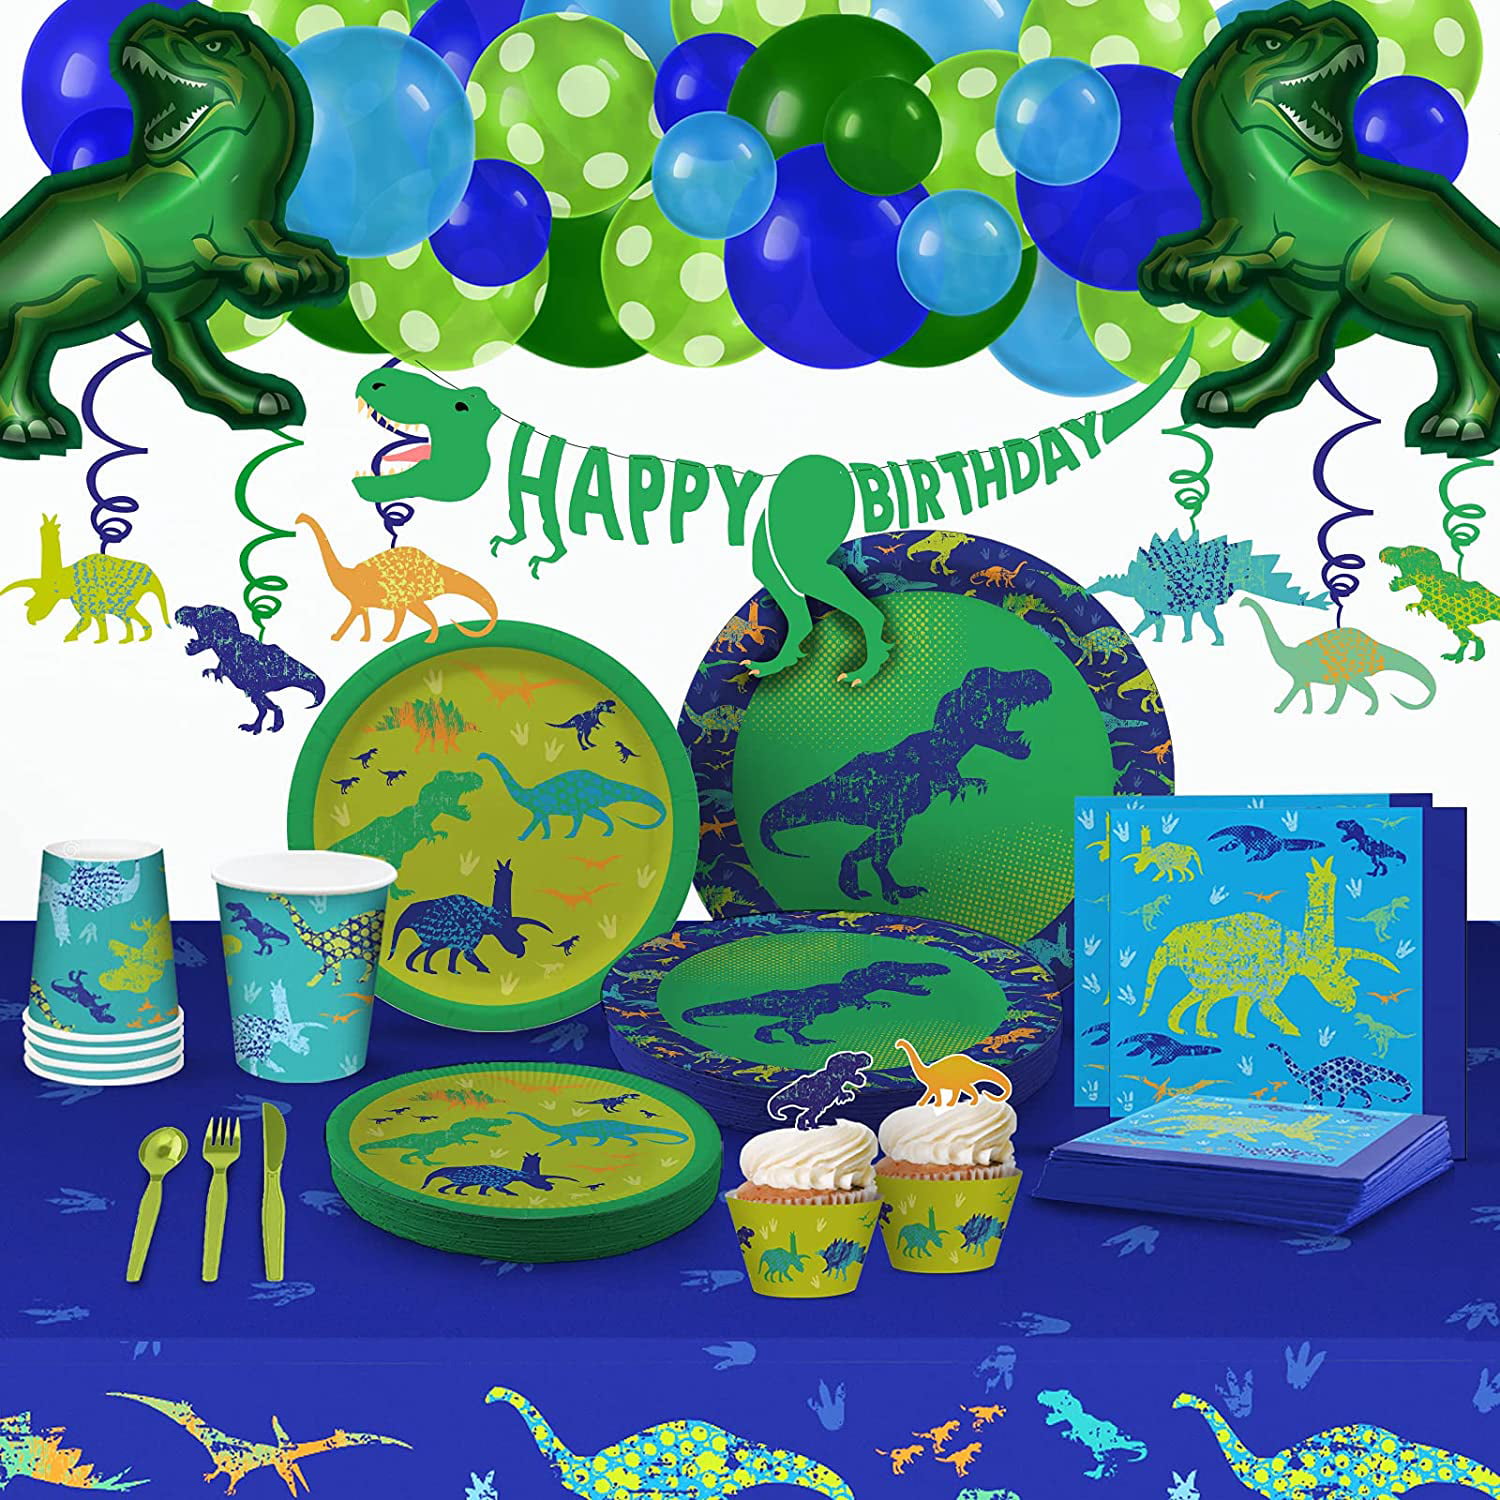 Dinosaur Party Supplies for Boys Kids Dino Themed Birthday Decorations Set Includes Plates Cups Napkins Straws Utensils Table Cover Banner & Balloons 142 PCS Serves 12 Guests 